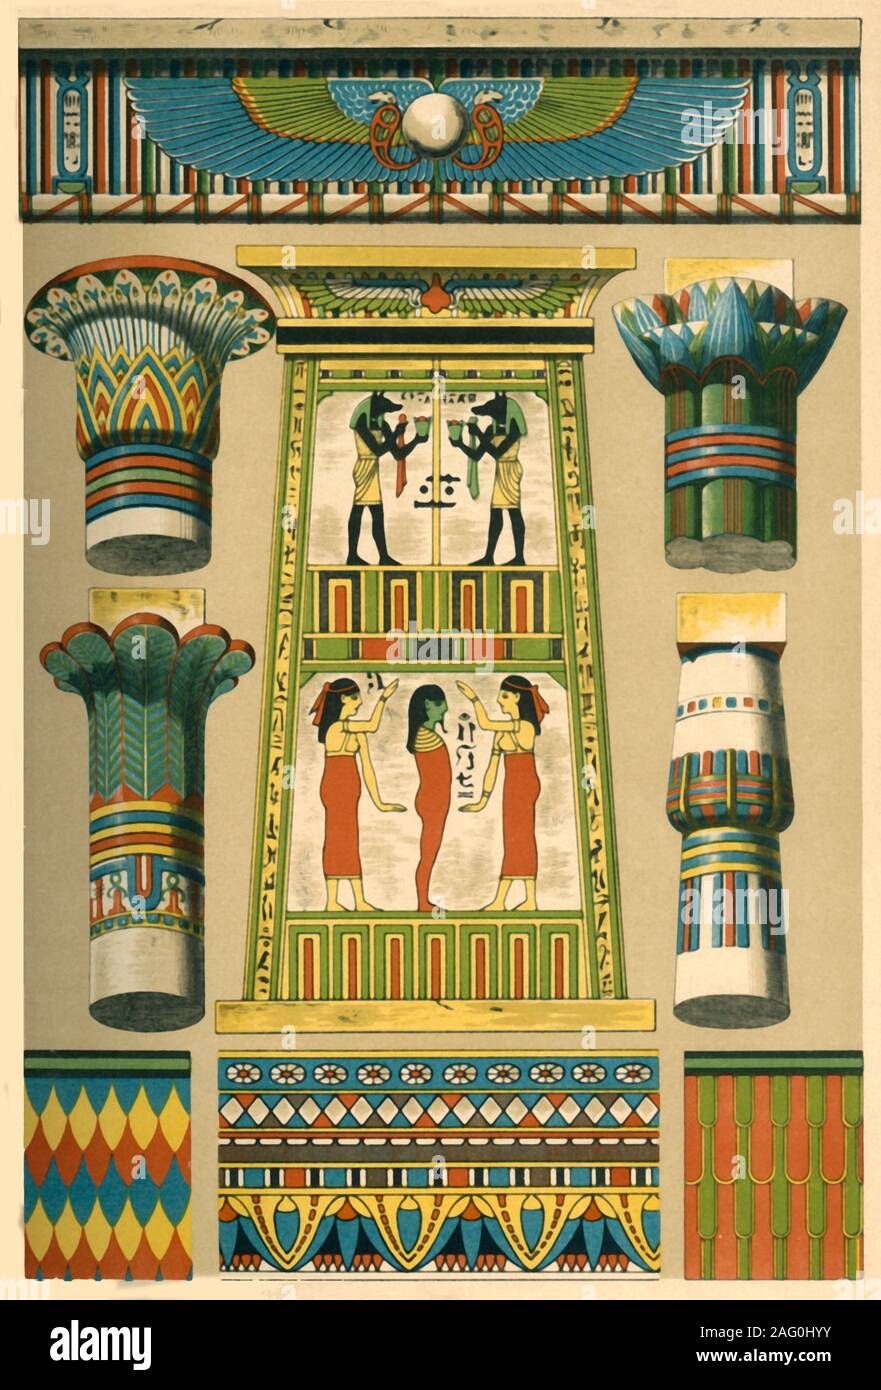 Ancient Egyptian decoration, (1898). Examples of architecture and painting from Ancient Egypt: 'Fig 1: Pylon (entrance-tower) with figural representations and hieroglyphics. Louvre, Paris. Fig 2: Cornice of the entablature of the great temple at Philae. Sculpture and painting. Fig 3: Capital from the temple at Luxor, representing full-blown papyrus. 1200 BC. Fig 4: Capital from a temple at Thebes. (Buds-capital). Fig 5: Capital from a portico at Edfu. (Representing a palm-tree). Fig 6: Capital from Thebes, 1200 BC. Represents a papyrus-bud. Fig 7: Mummy-case painting. Figs 8 and 9: Scaly desig Stock Photo